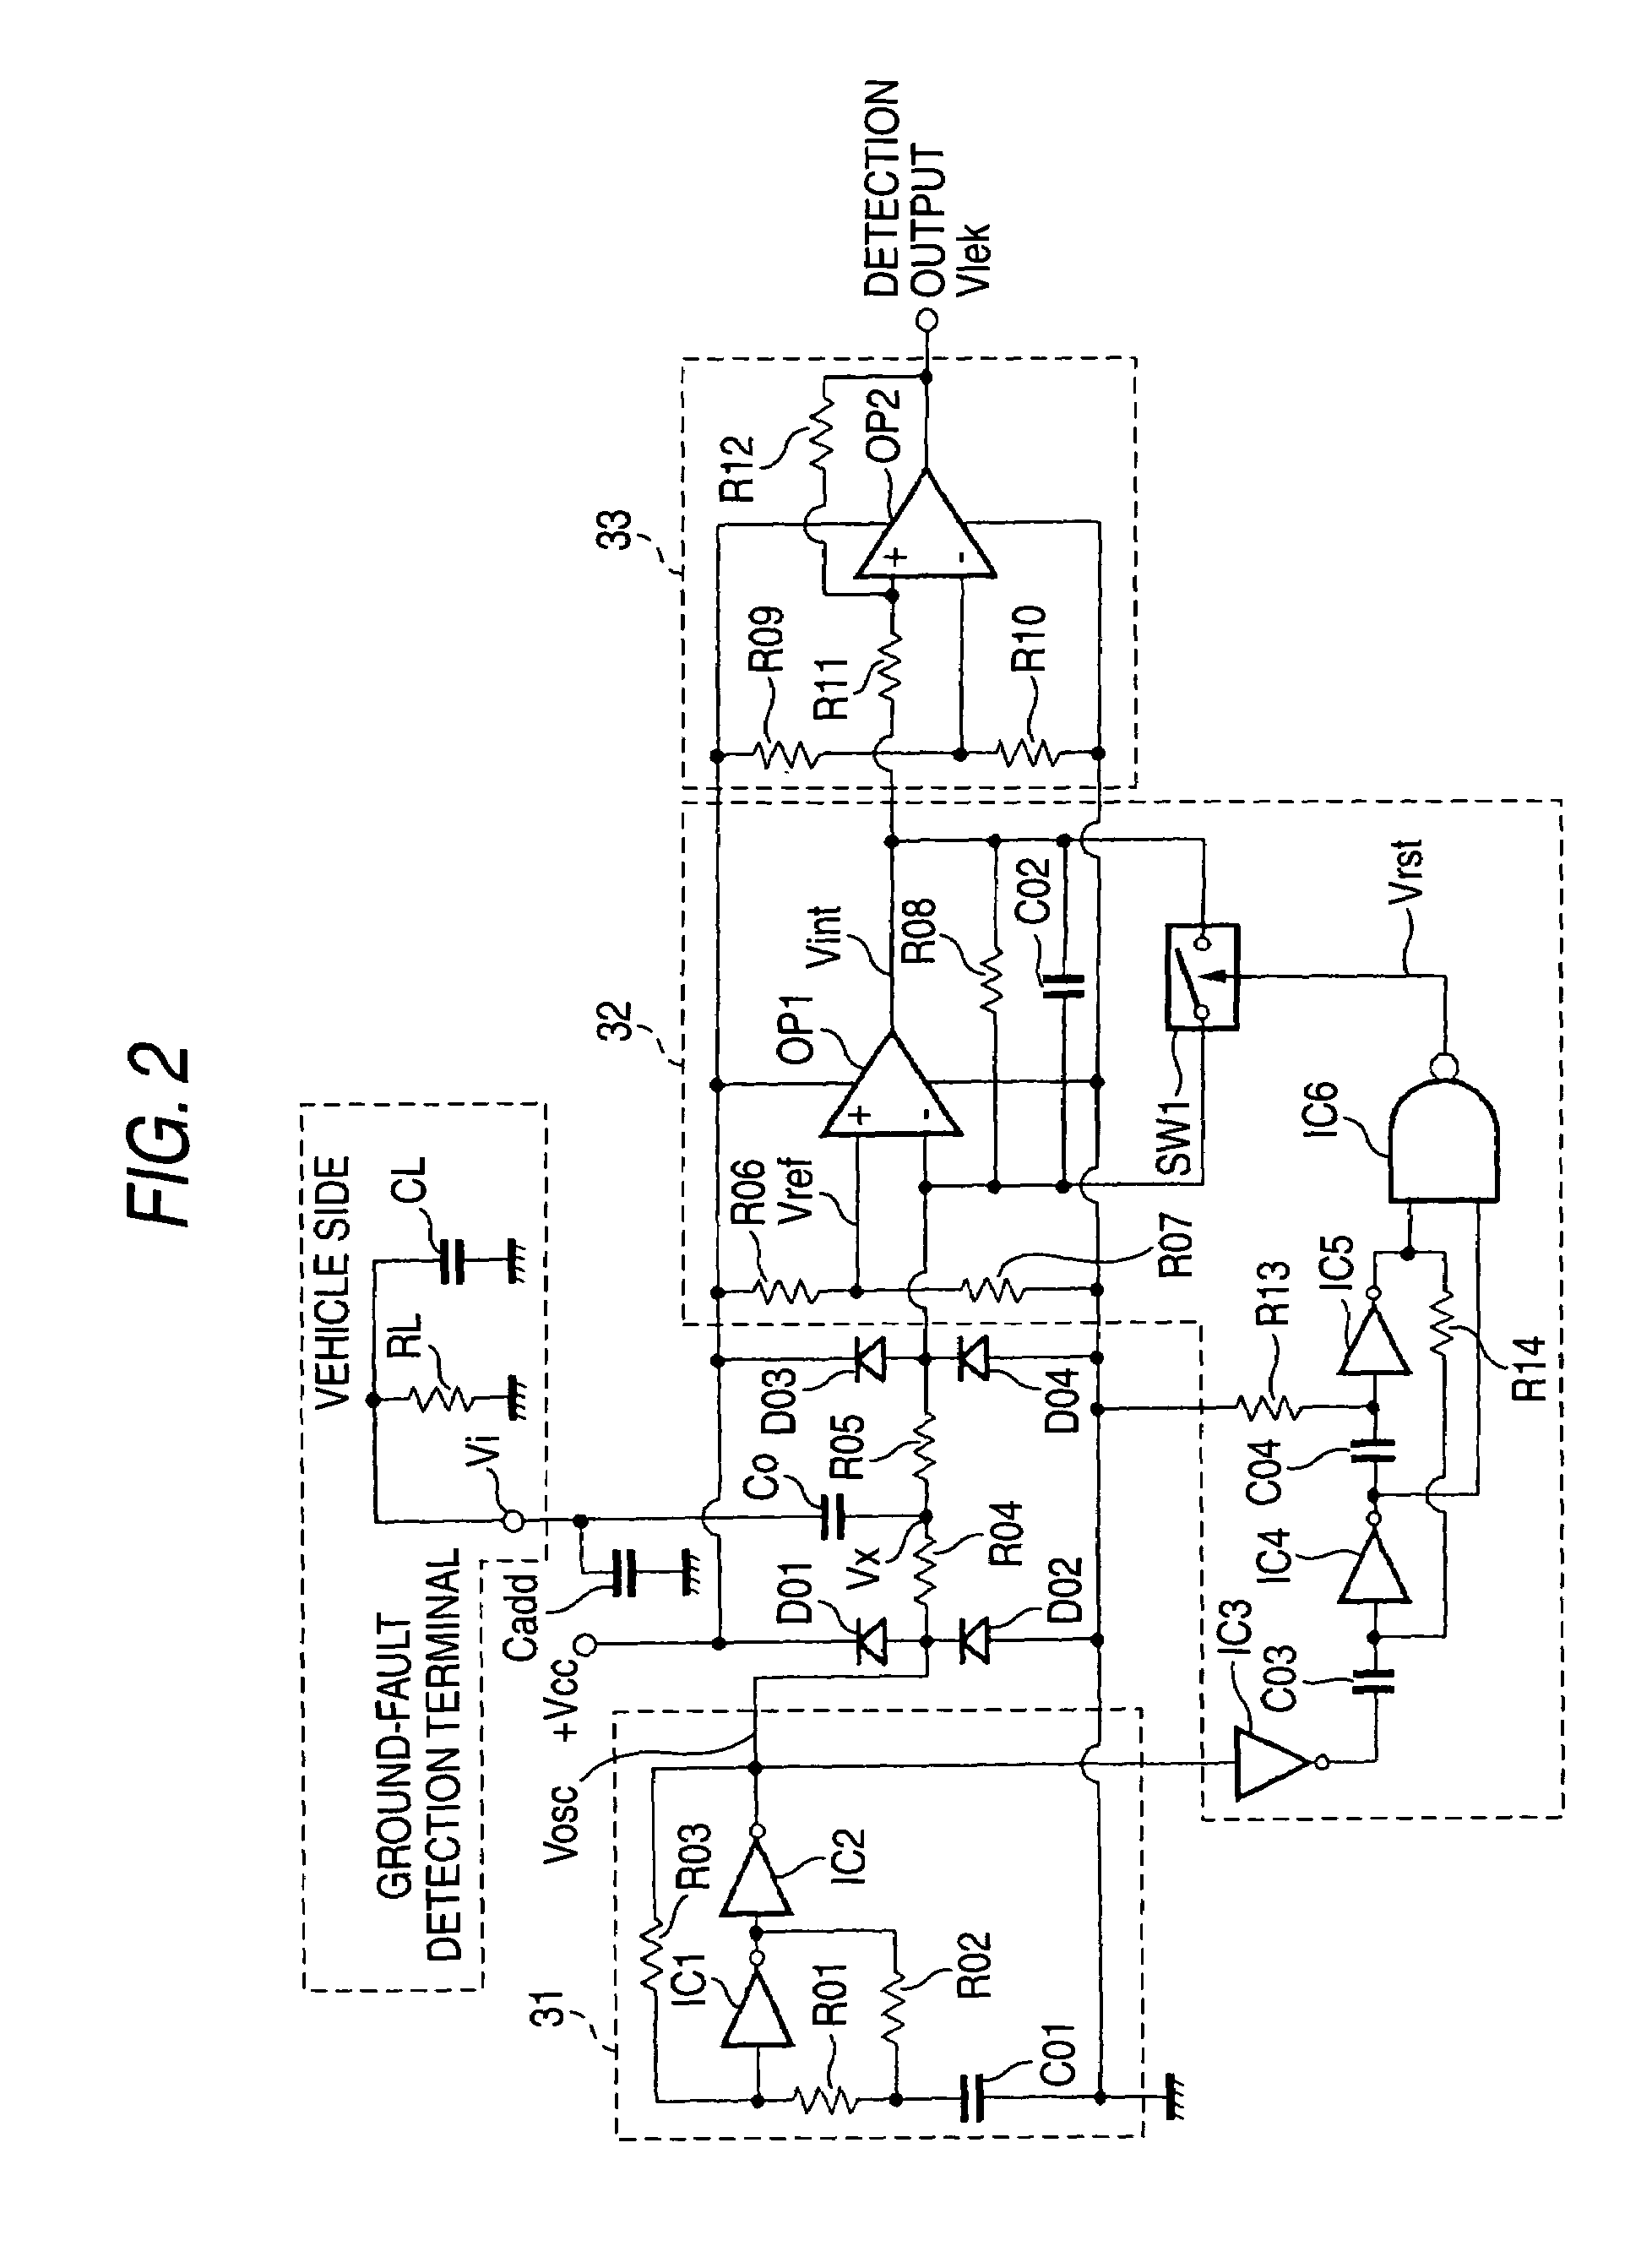 Ground-fault detecting device and insulation resistance measuring device